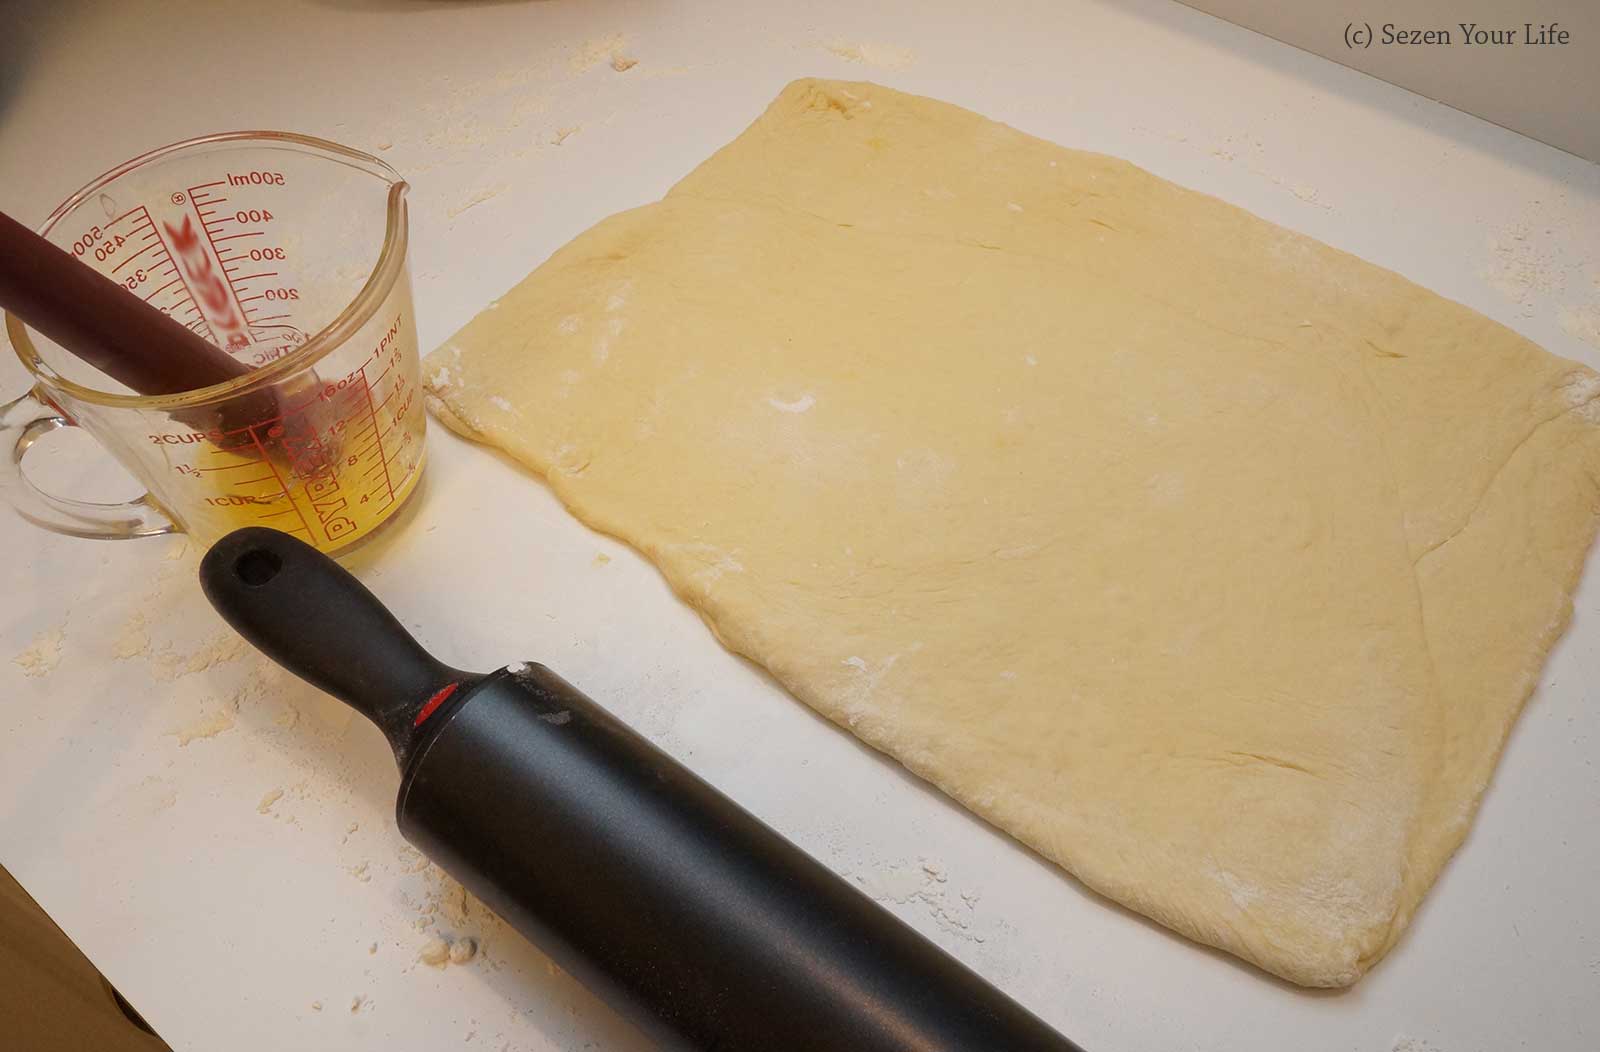 Cinnamon Roll brushing with Melted Butter by Sarah Franzen